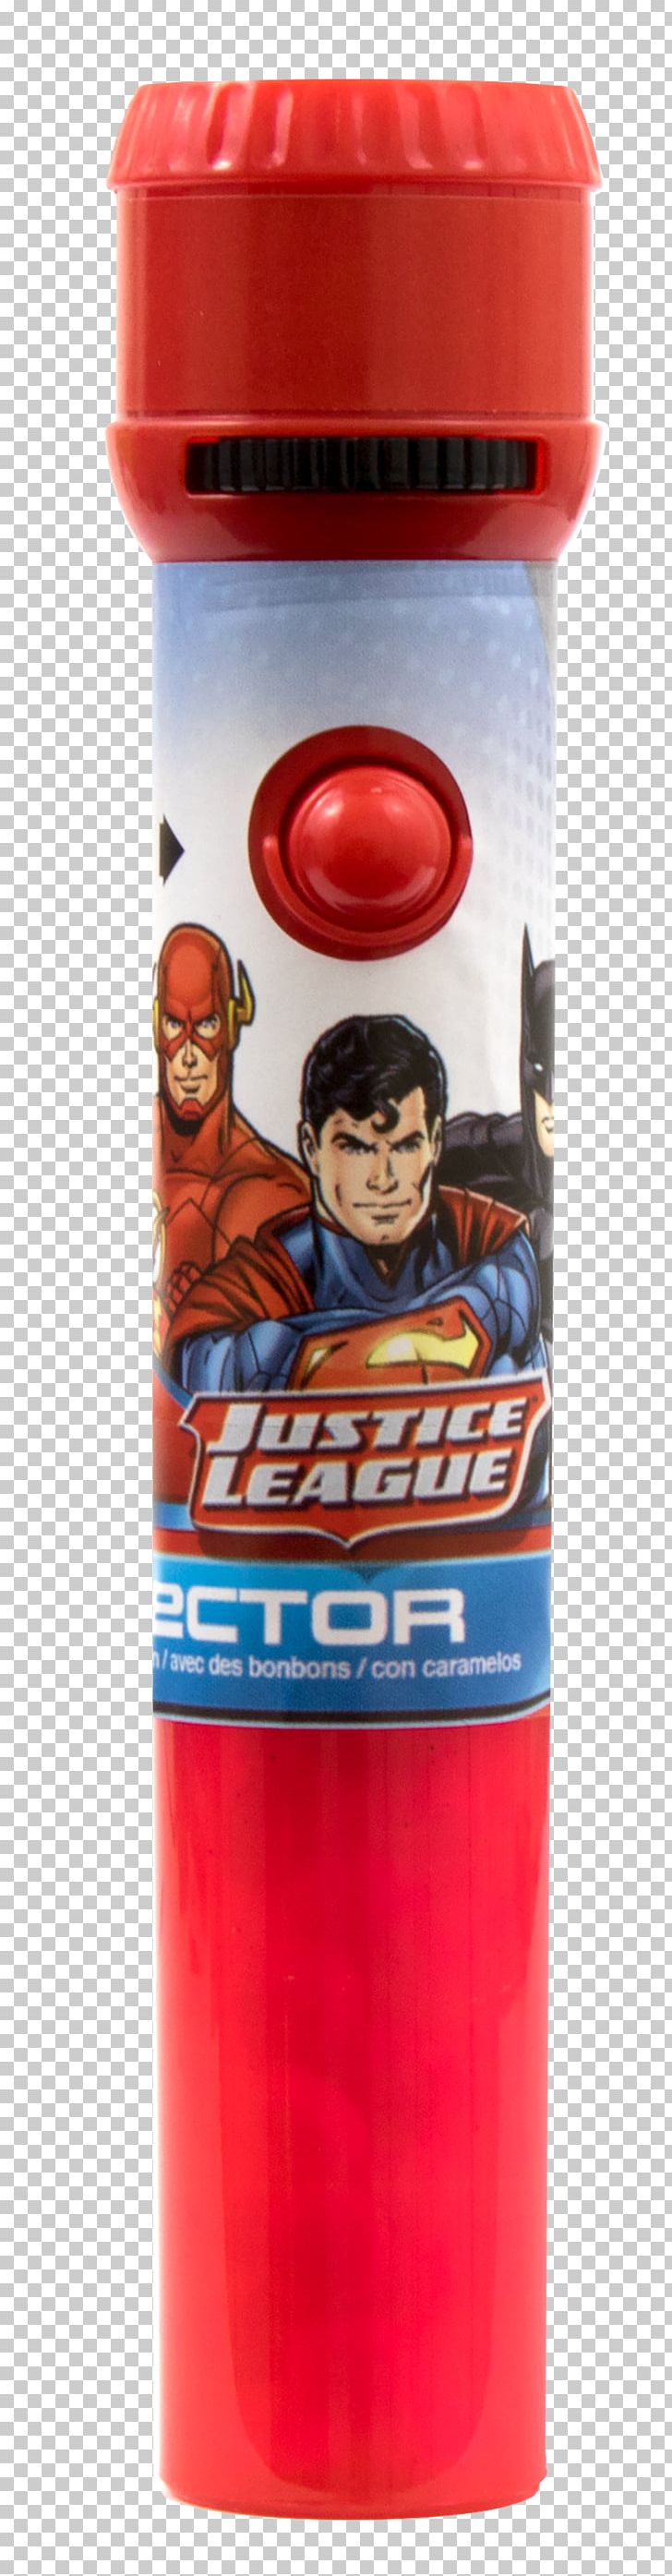 Justice League Projector BIP Holland B.V. Candy PNG, Clipart, Banana, Bip Holland Bv, Bottle, Candy, Coloring Book Free PNG Download